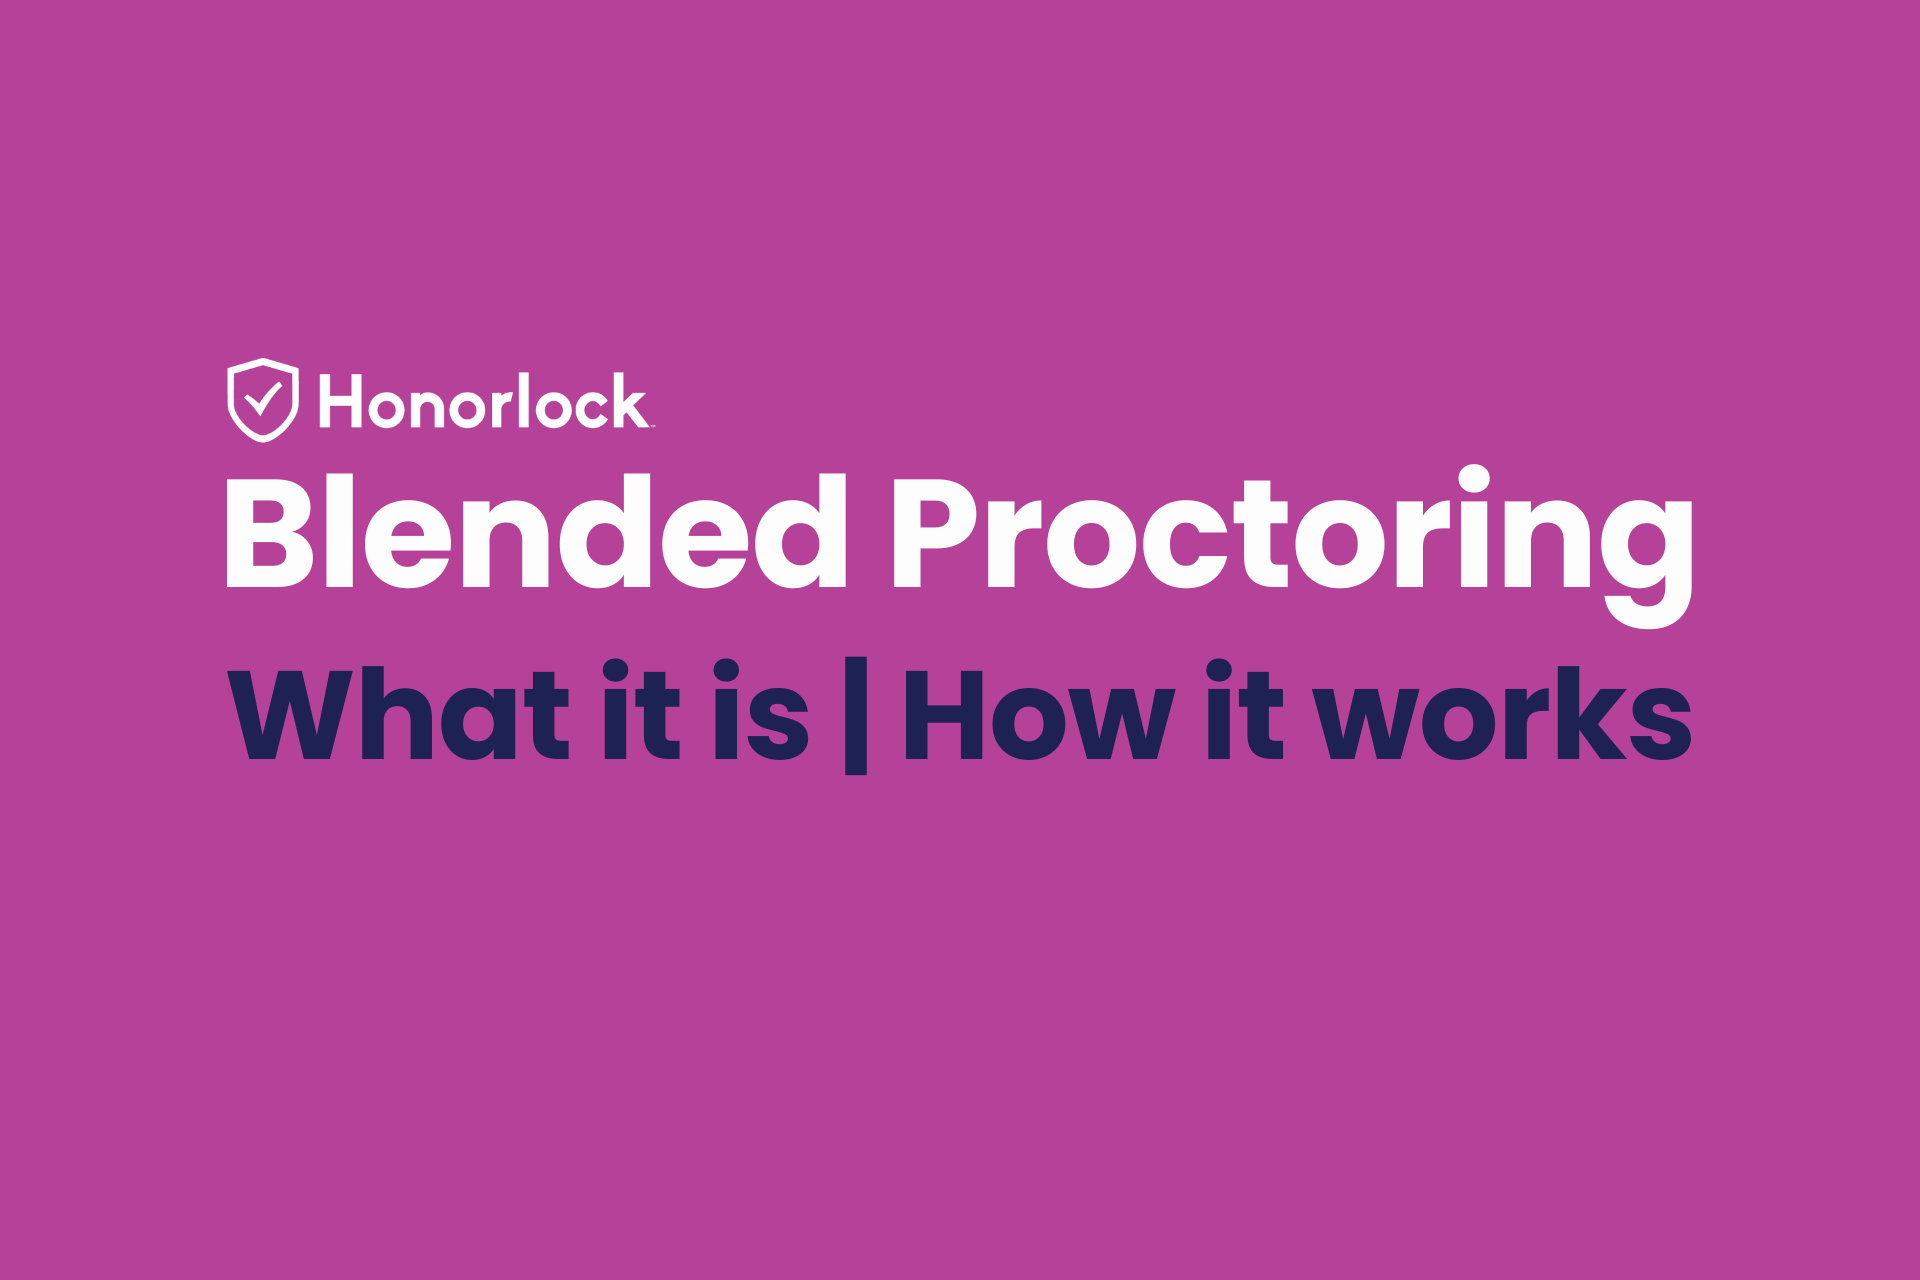 Article with infographic about how blended proctoring works